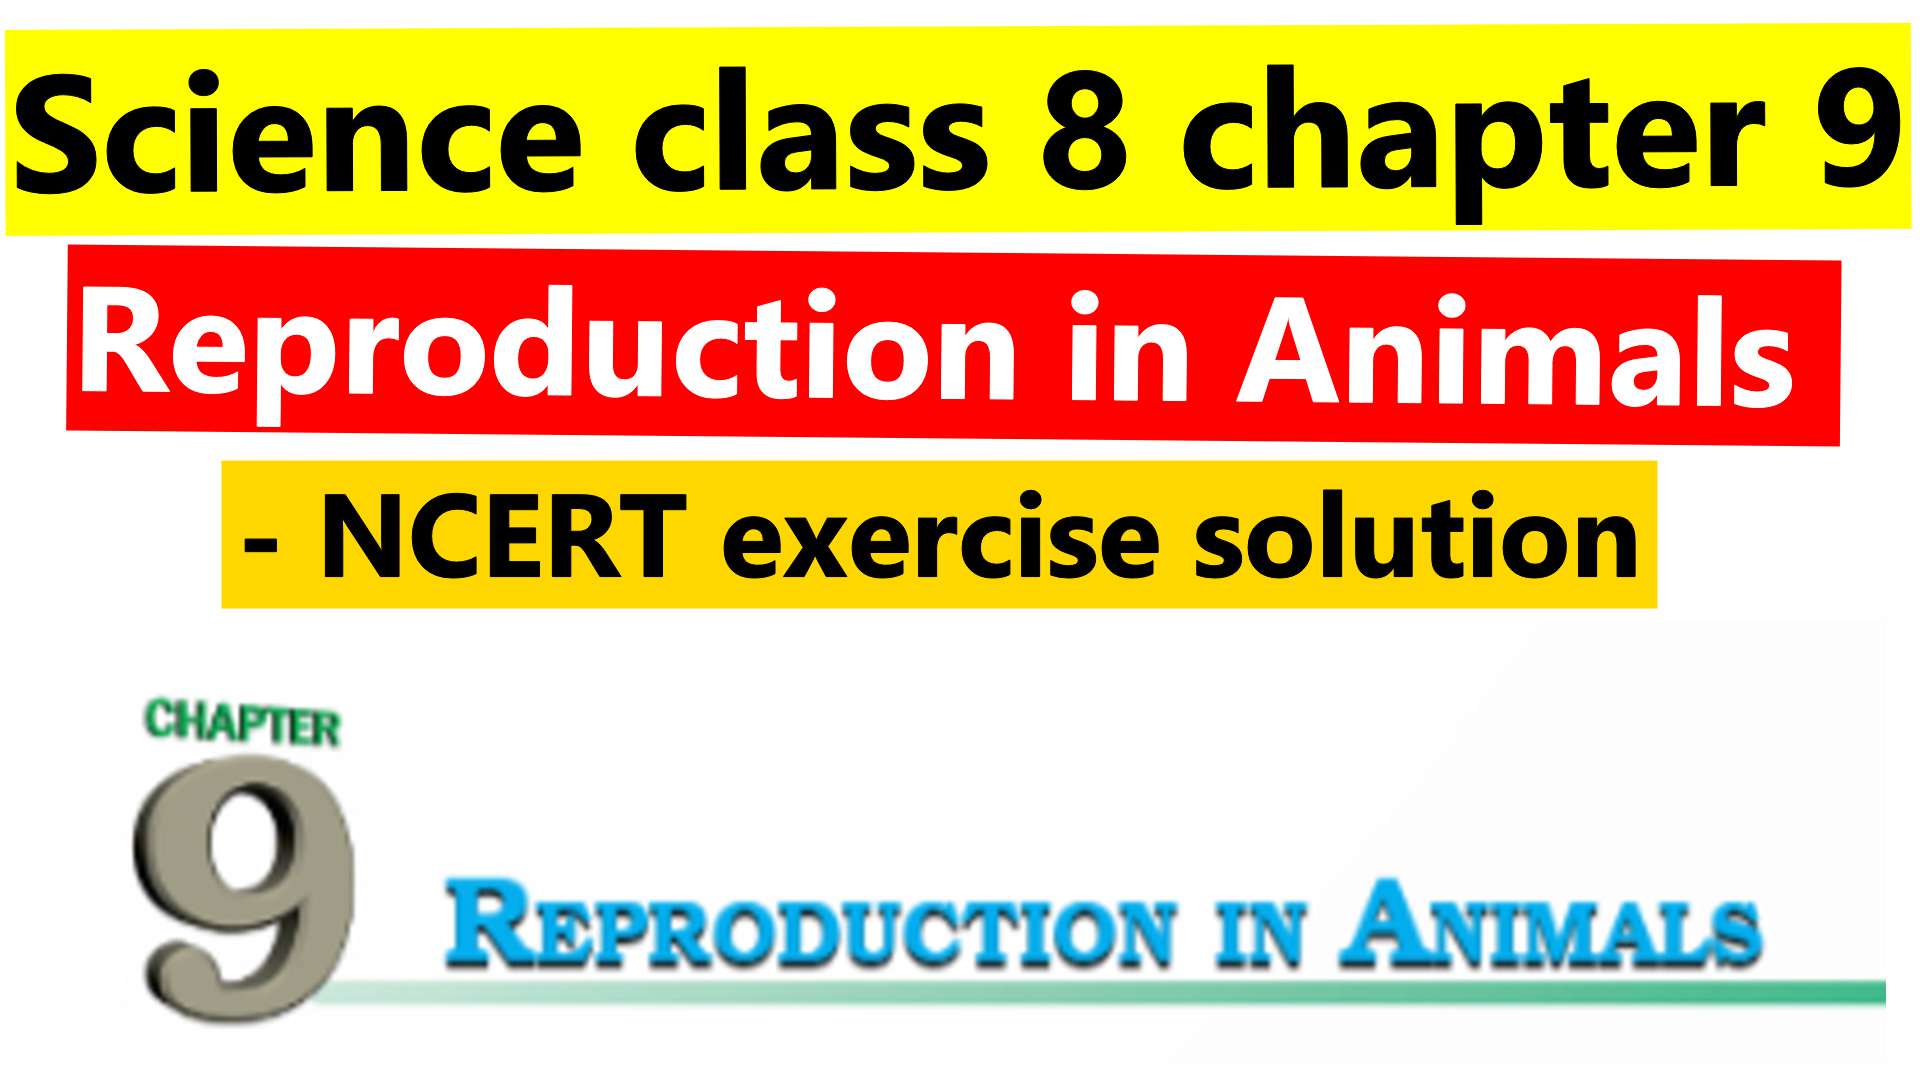 Science class 8 chapter 9 - Reproduction in Animals - NCERT exercise  solutions